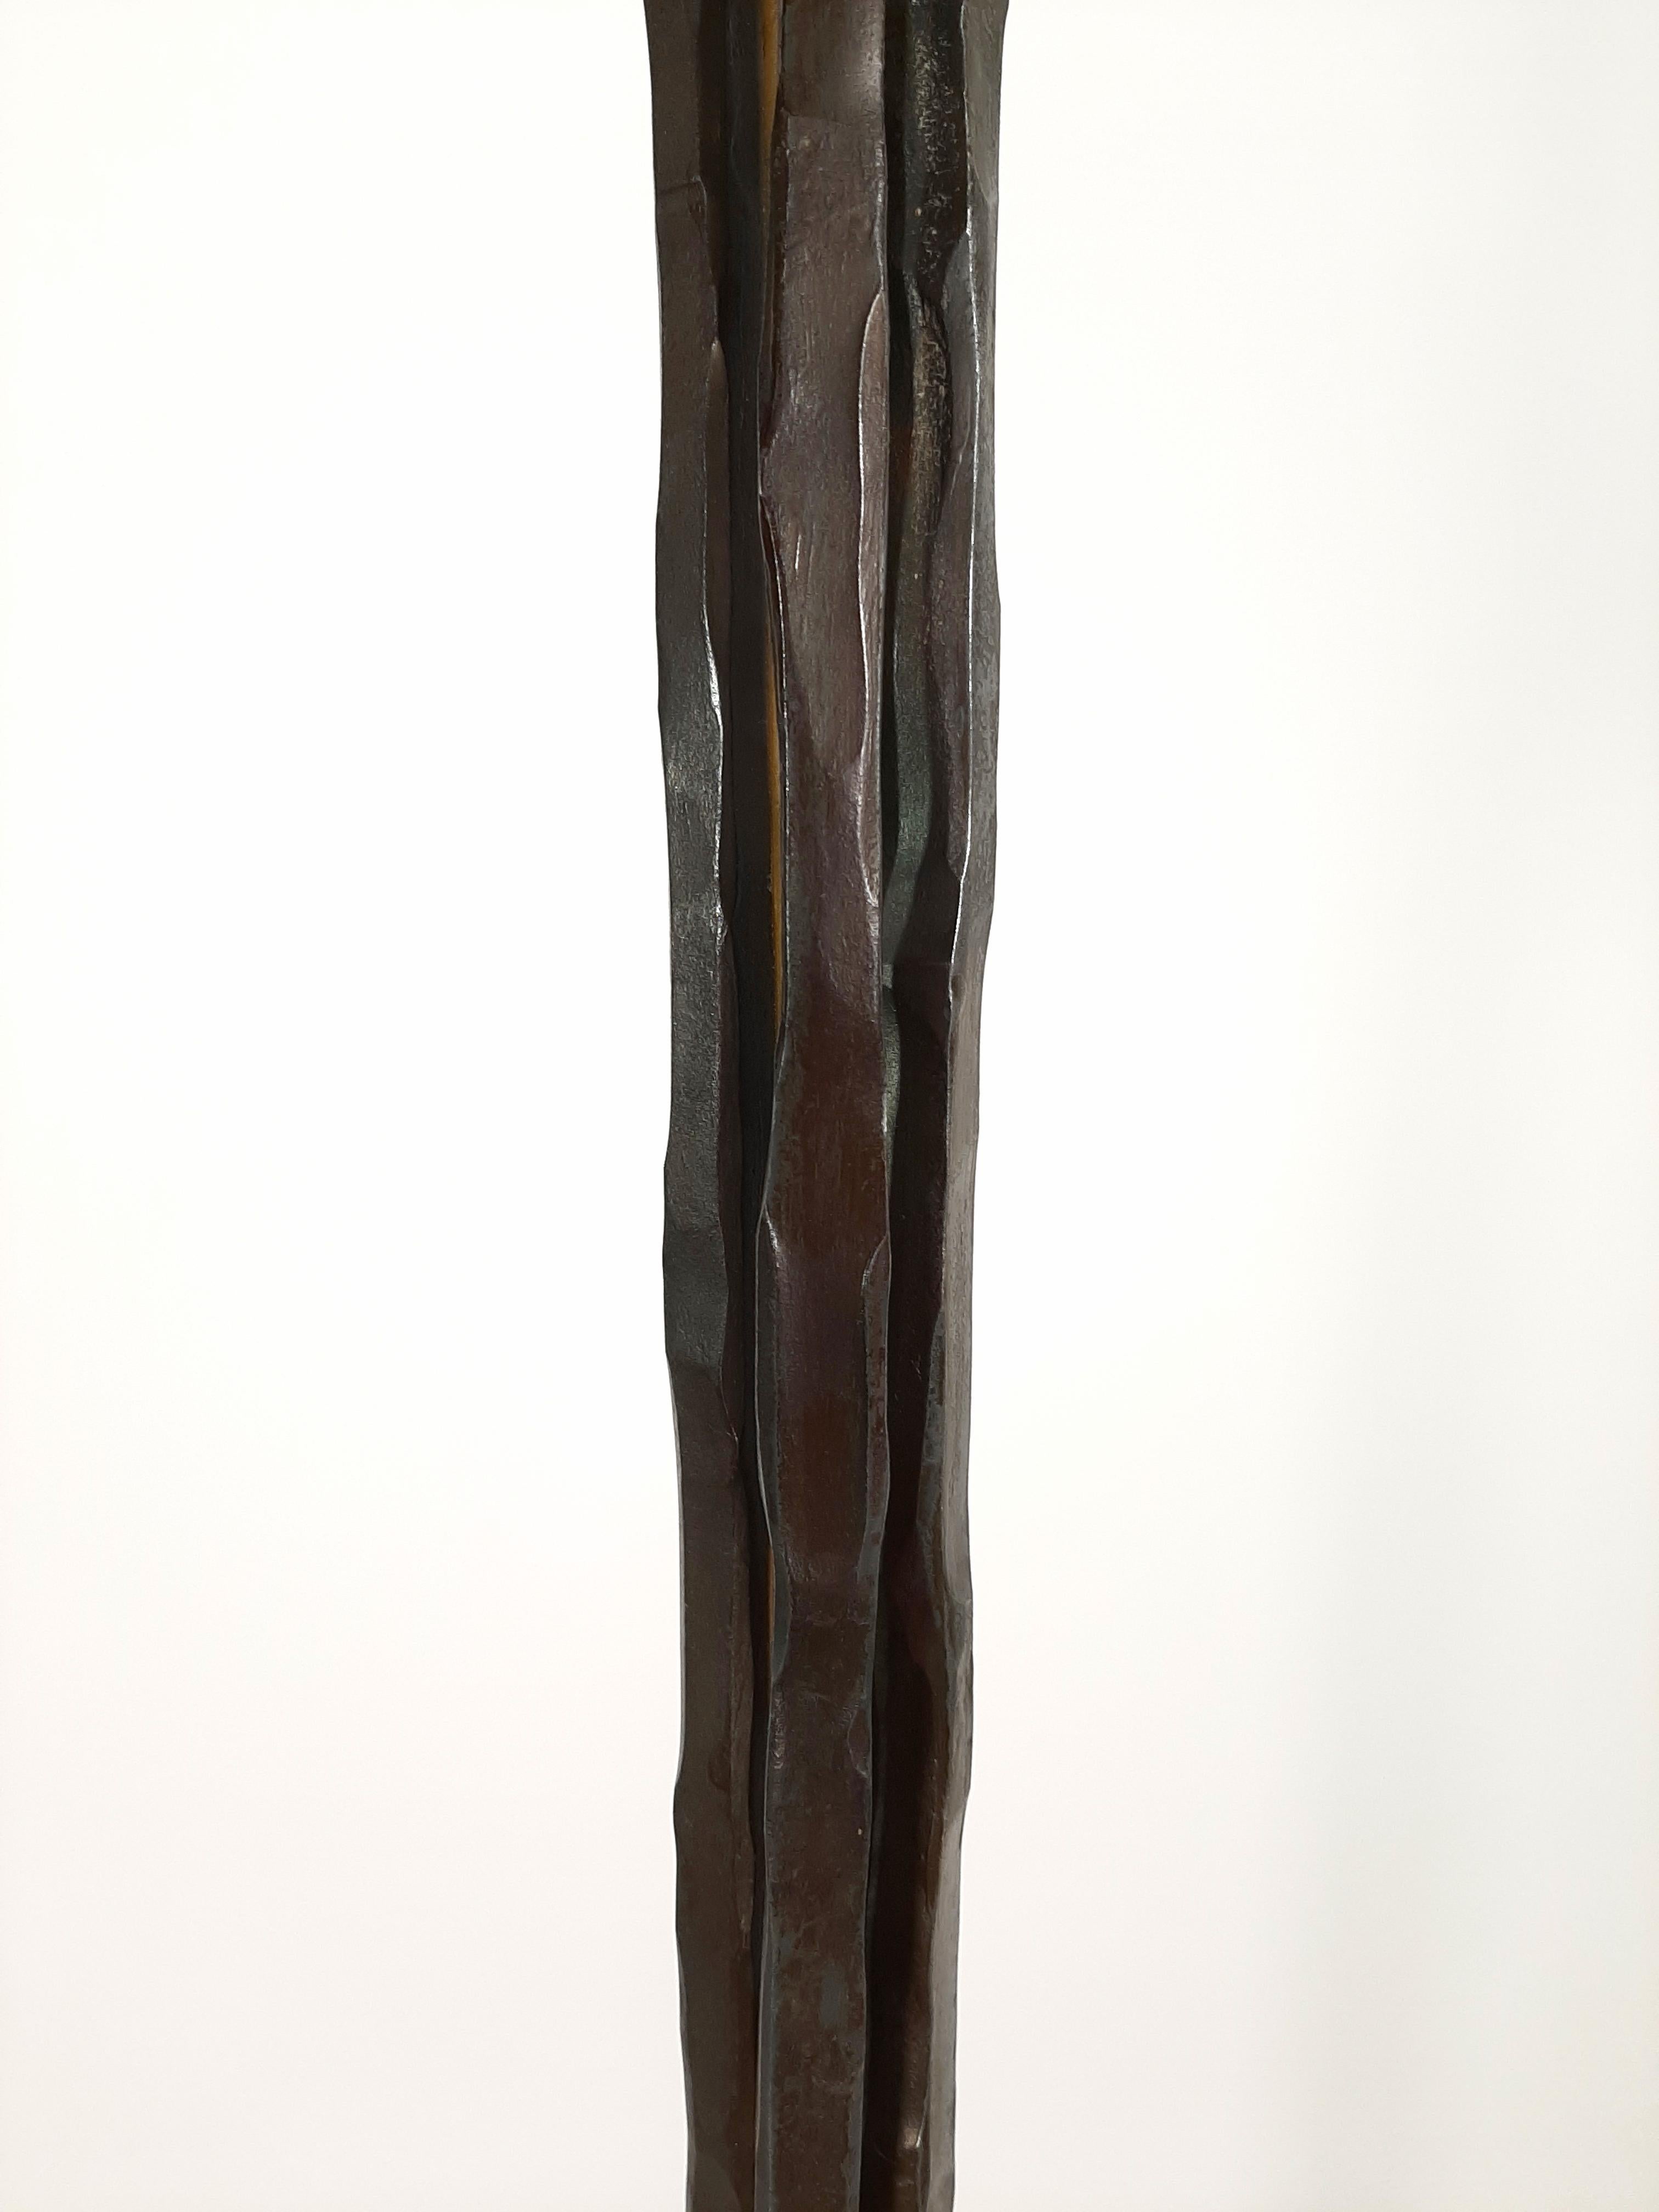 Rare Floor Lamp by Lothar Klute For Sale 4